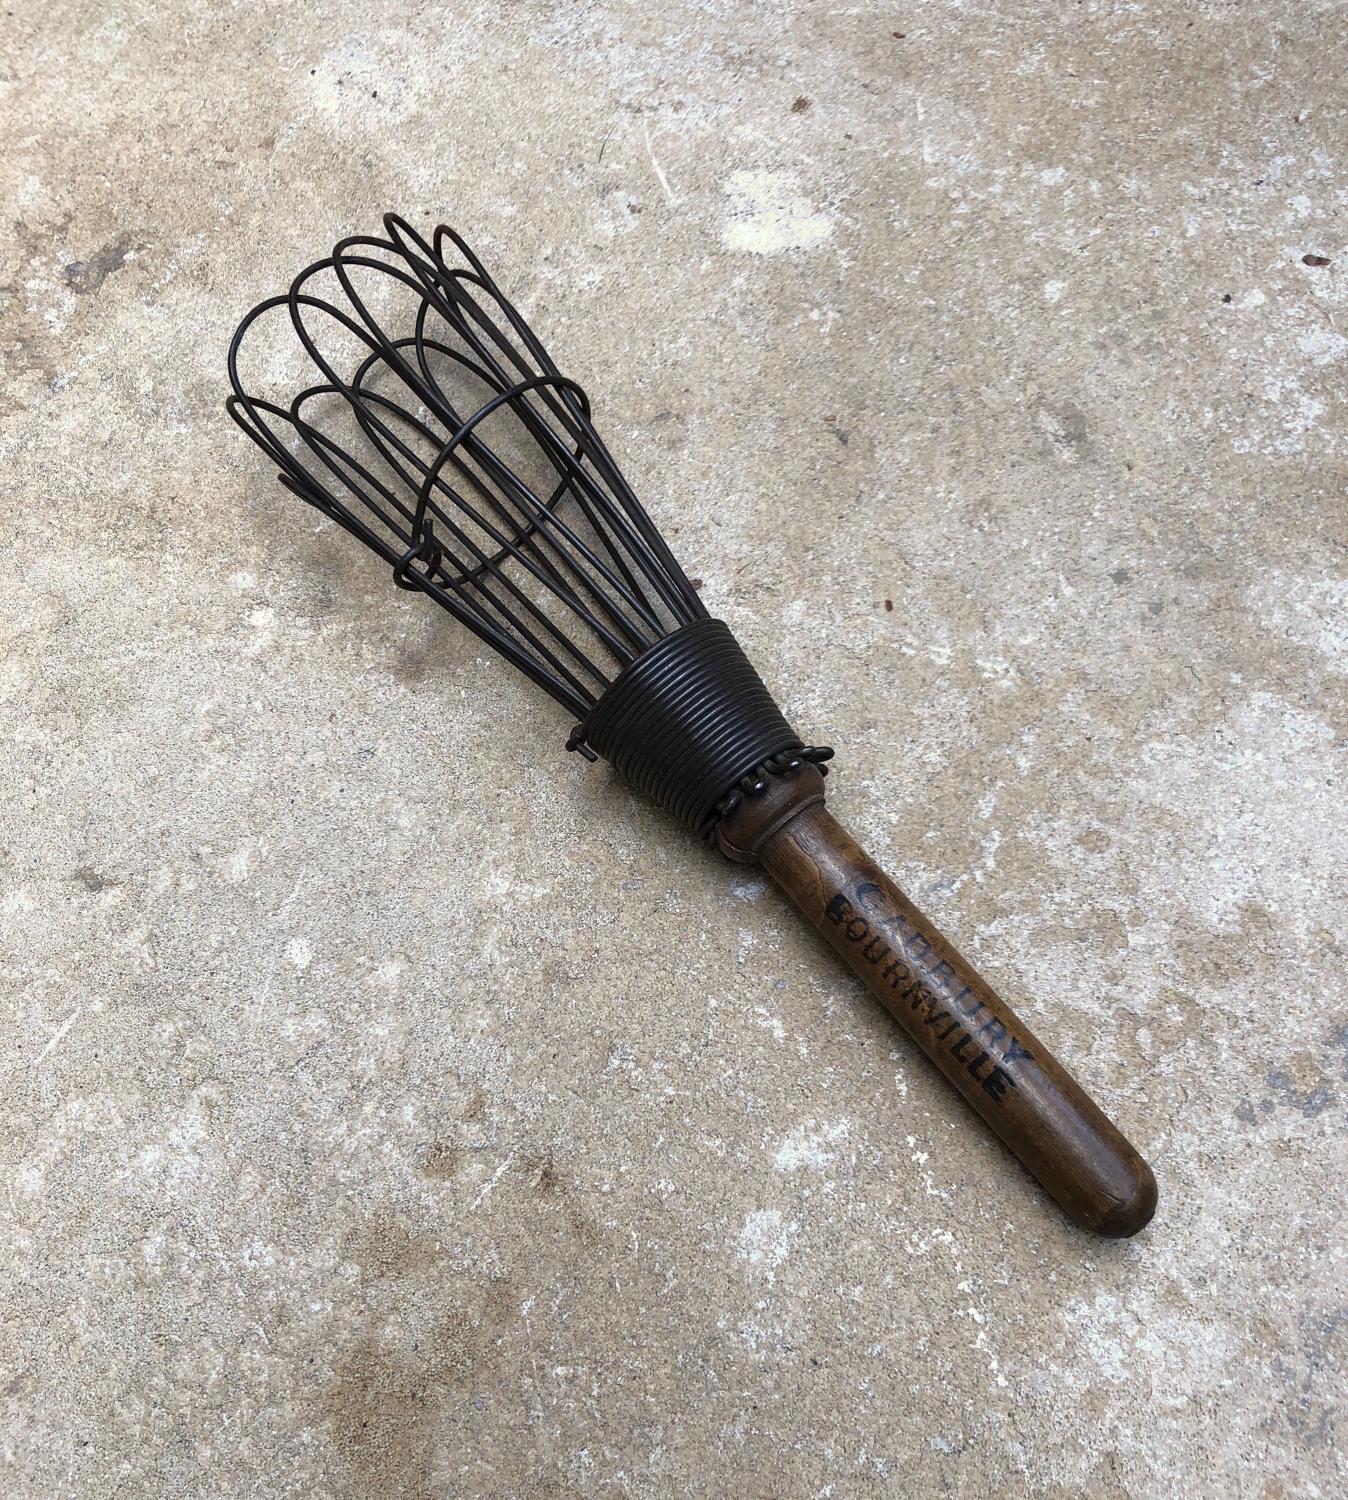 Early Cadbury Bournville Whisk - To Be Kept Clean